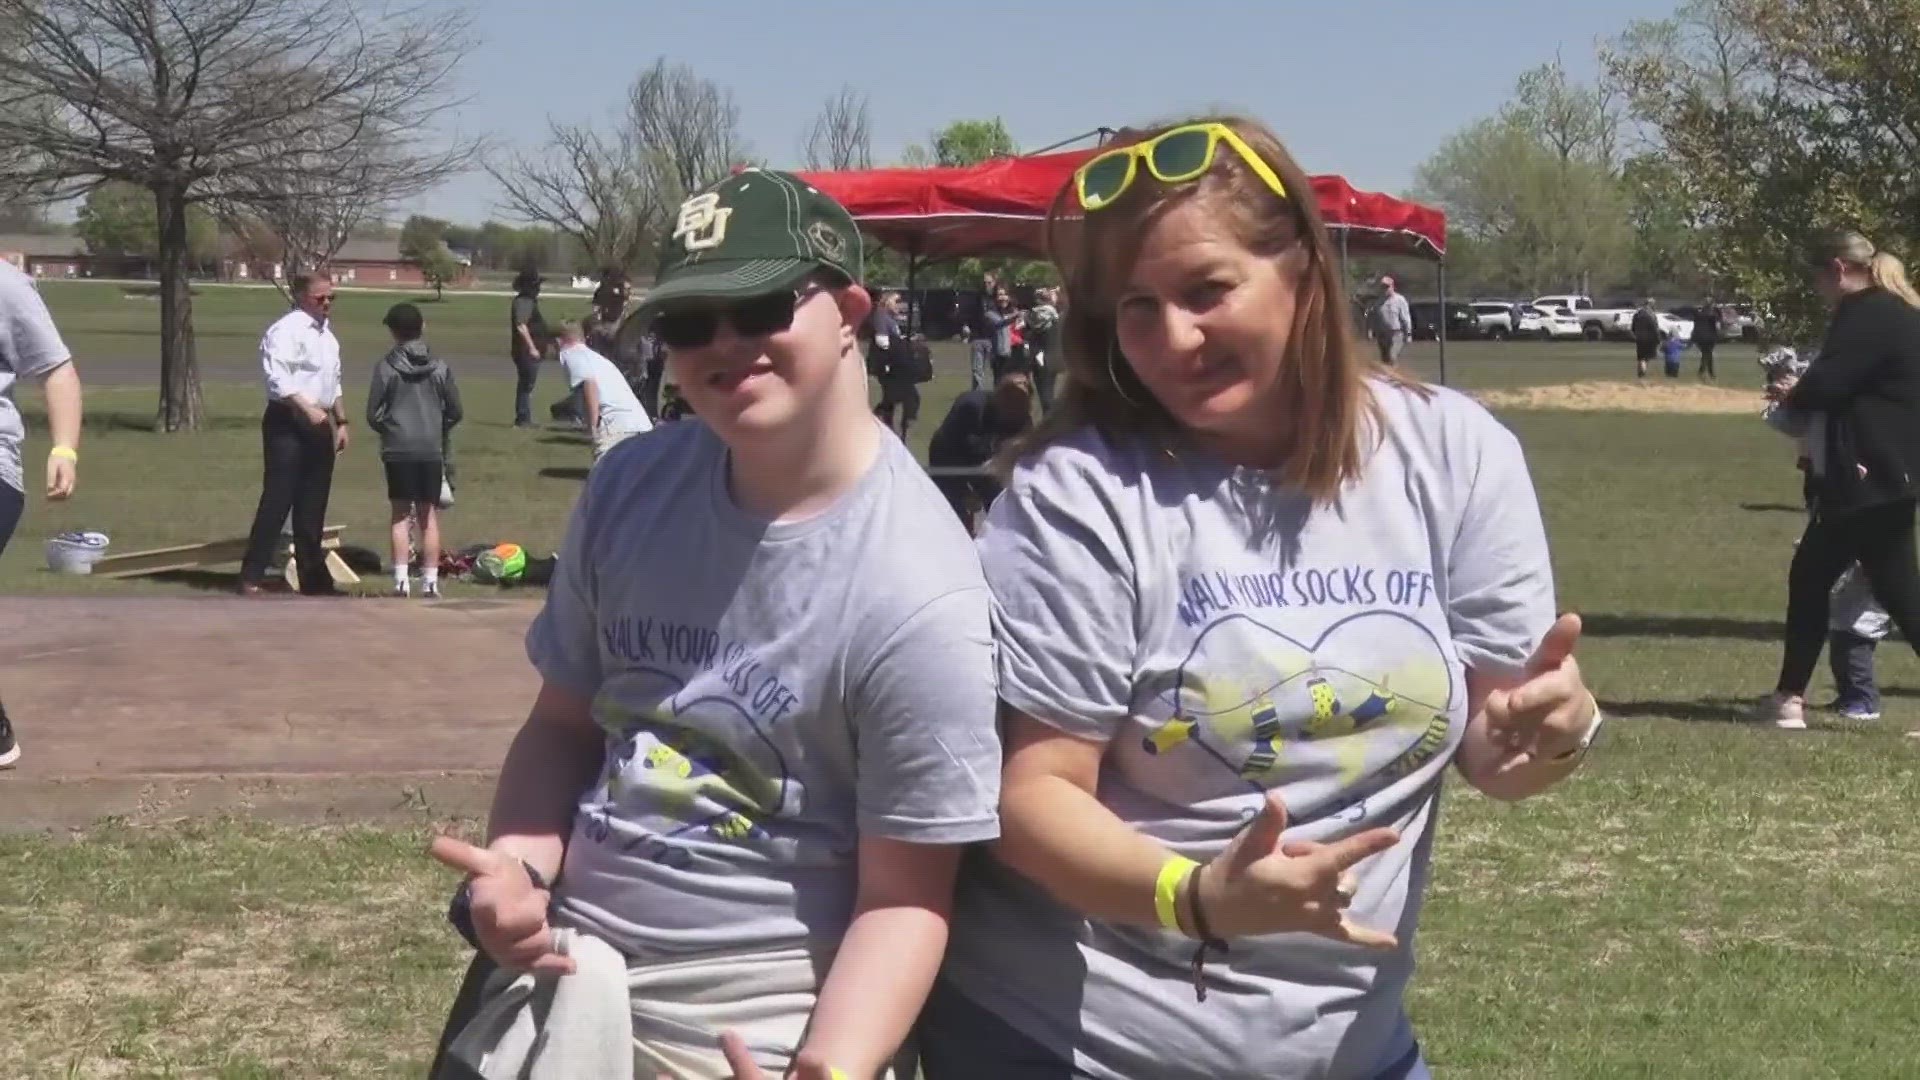 On March 19th, 2023, the Heart of Texas Down Syndrome Network organized a walk around Hewitt Park to spread awareness for World Down Syndrome Day.